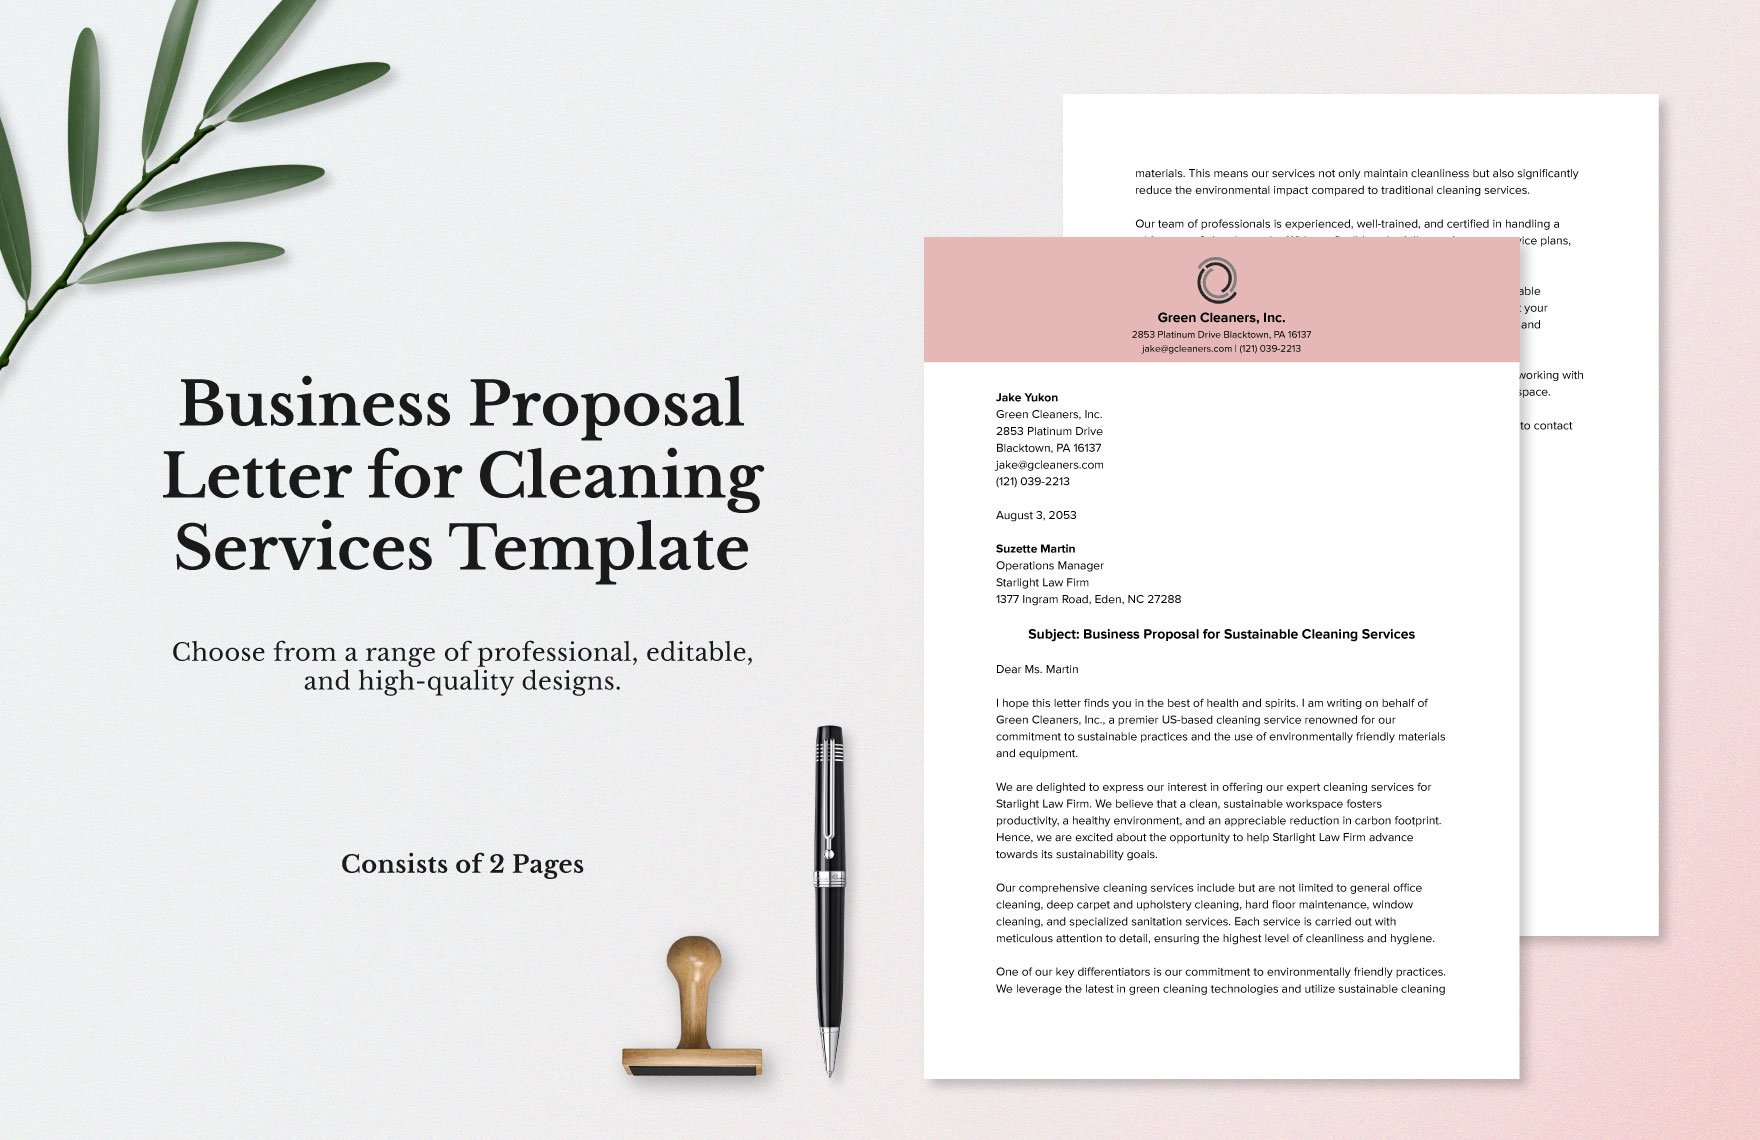 Business Proposal Letter for Cleaning Services Template